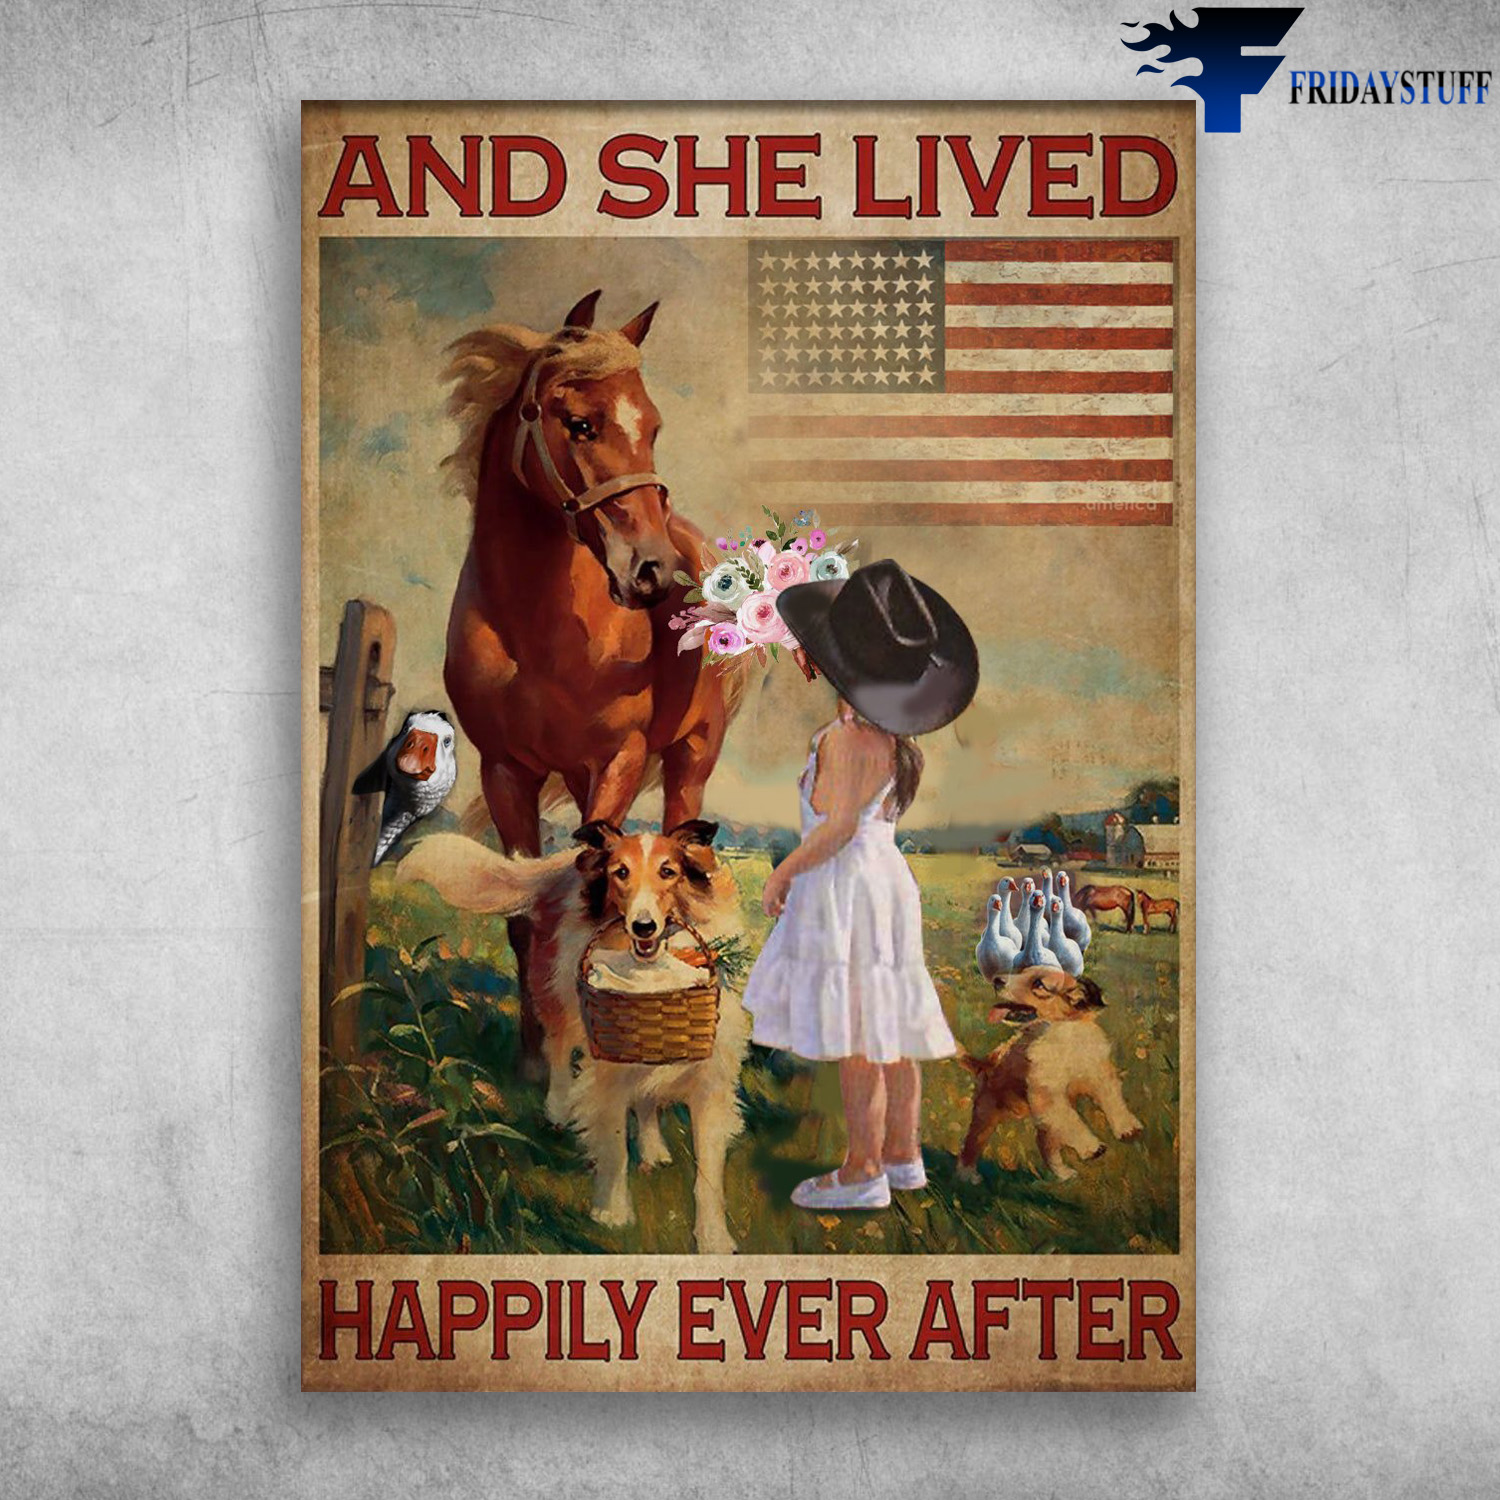 Little Girl And Horse, Dog Lover, Farmhouse American - And She Lived, Happily Ever After